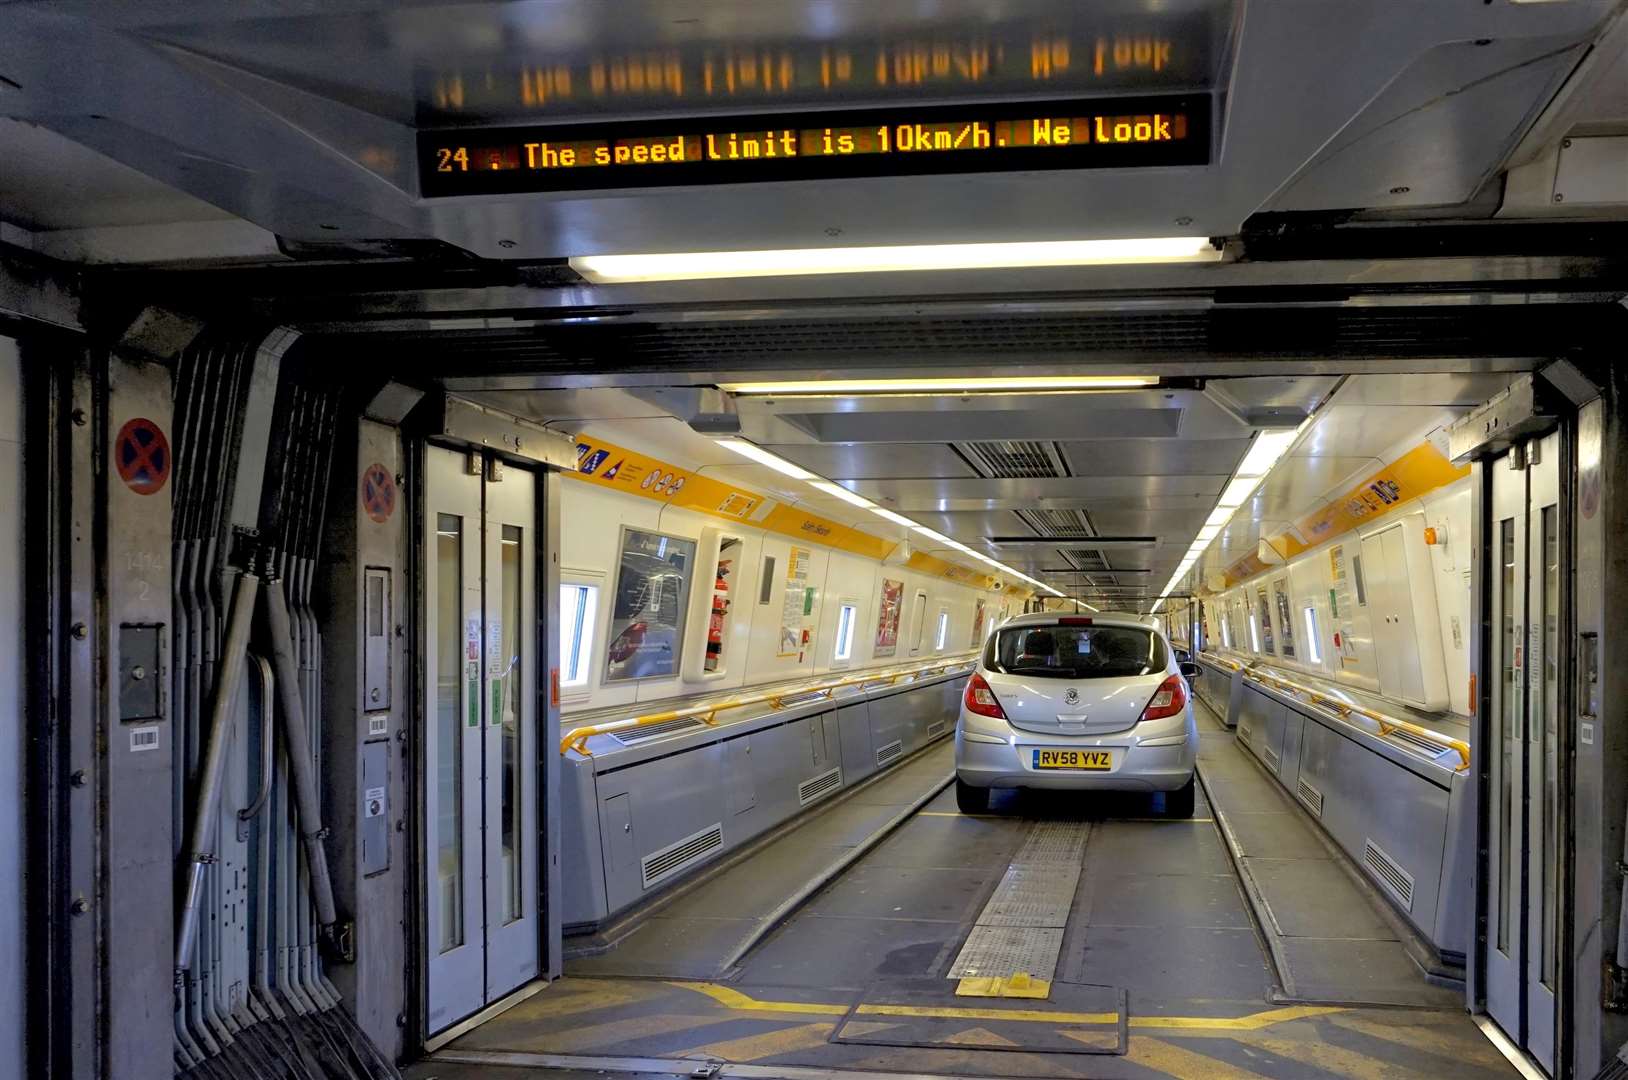 The Eurotunnel train from Folkestone to France